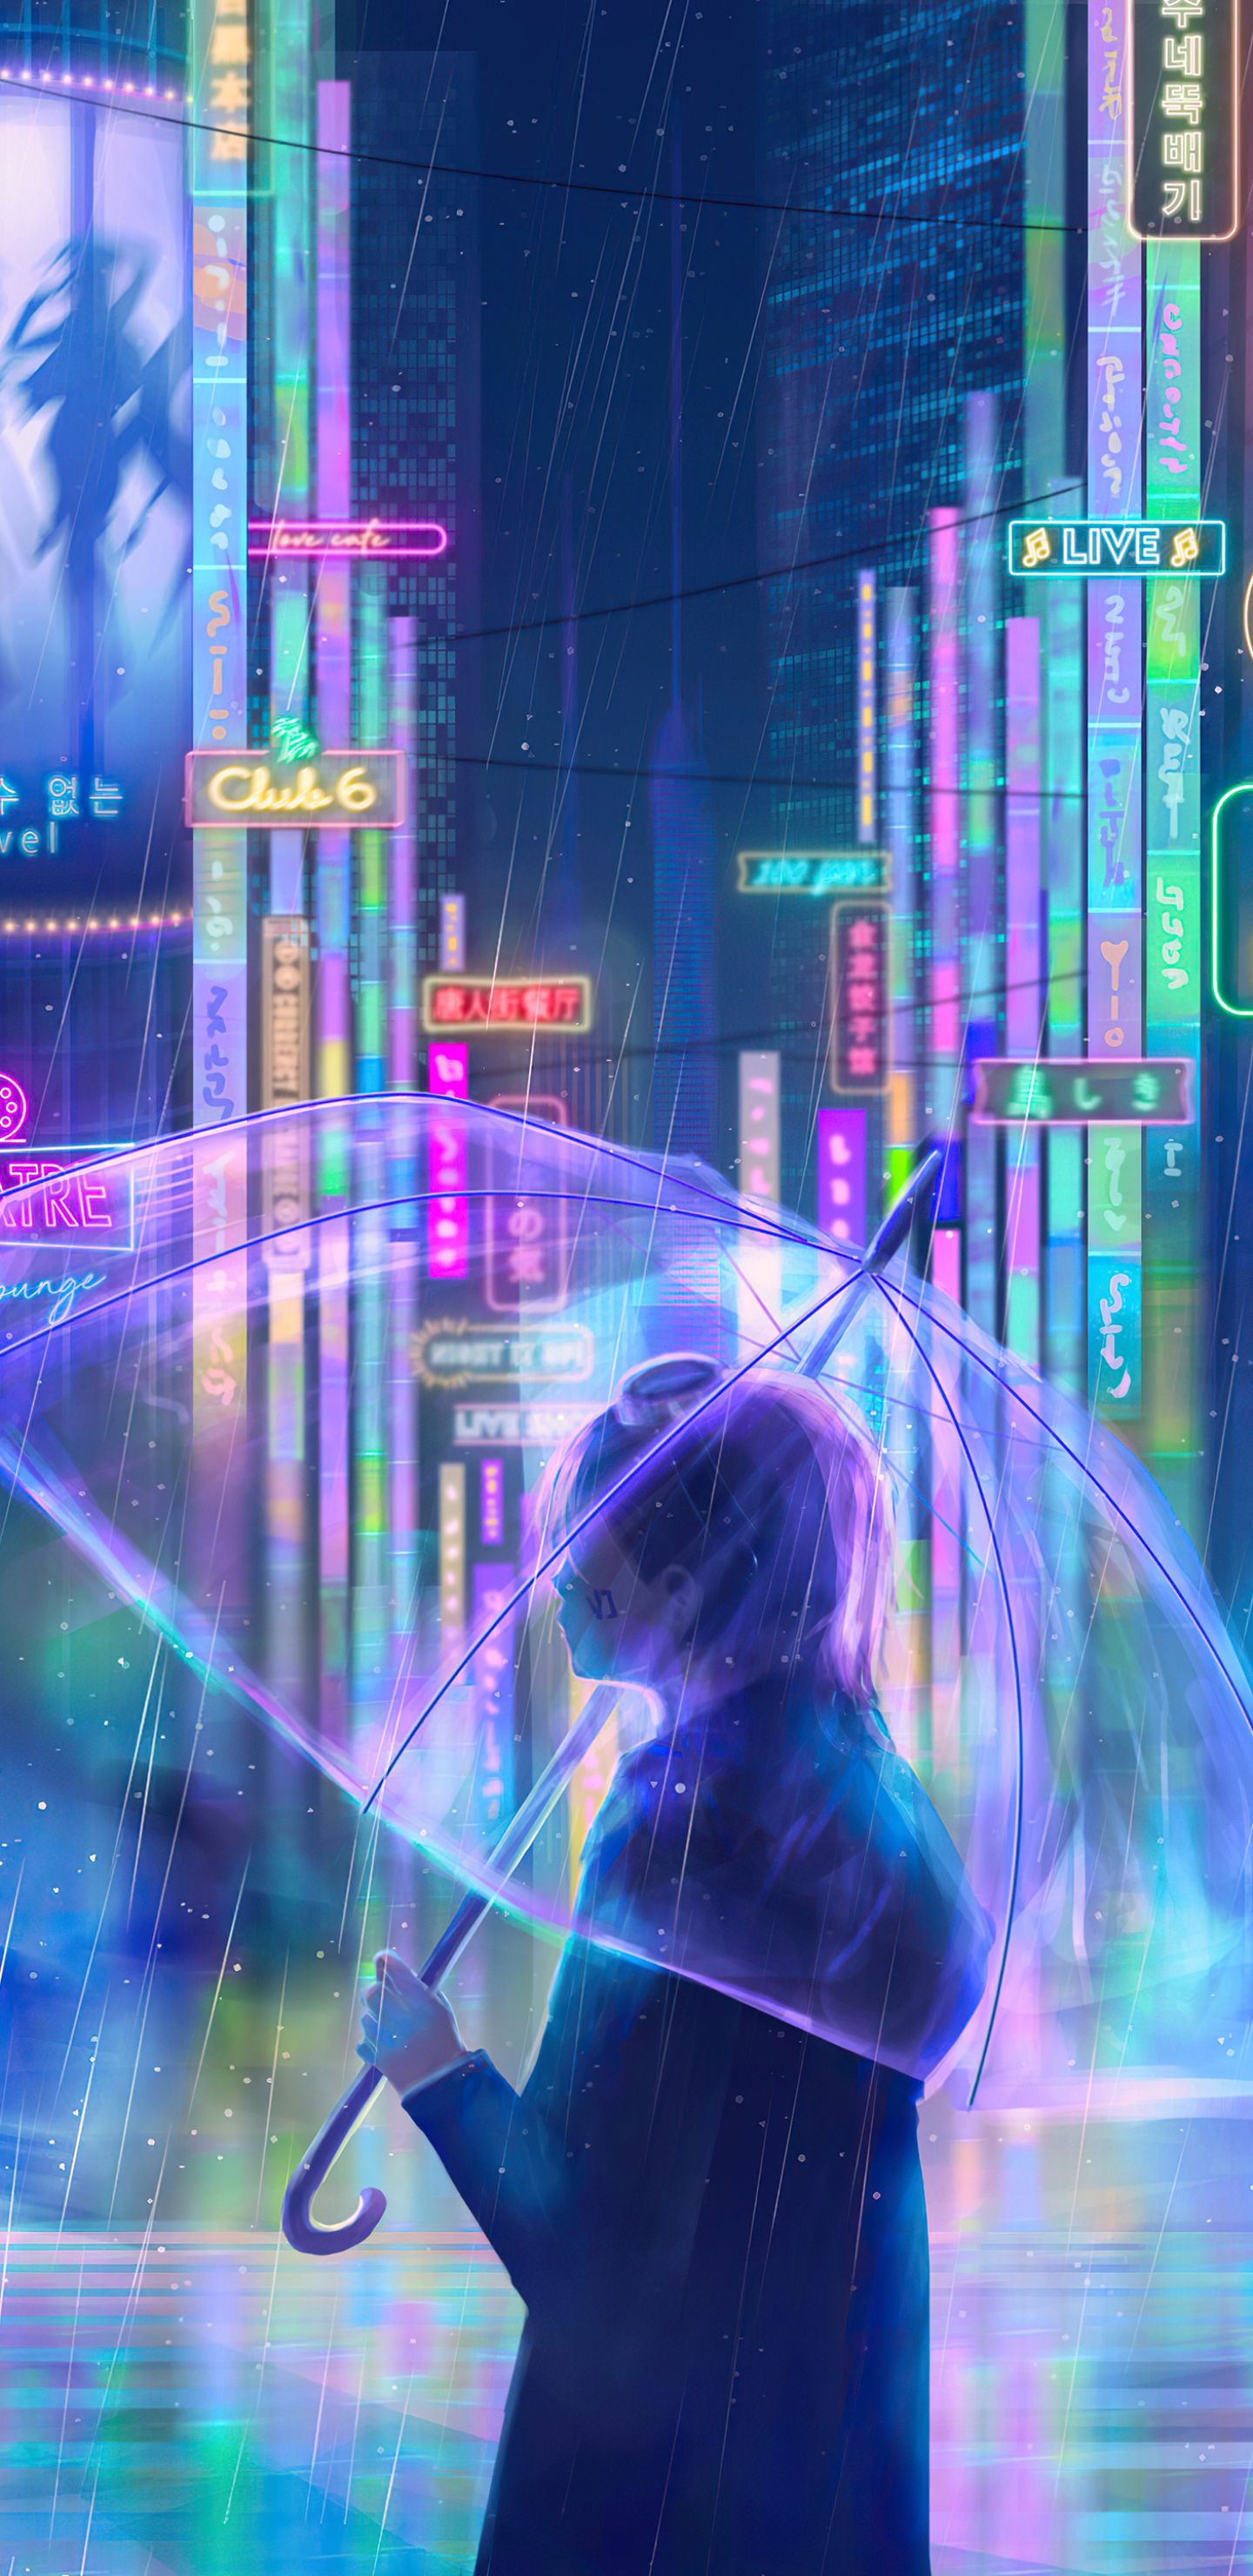 A cyberpunk girl with a transparent umbrella stands in the rain in front of a neon-lit cityscape. - Cyberpunk